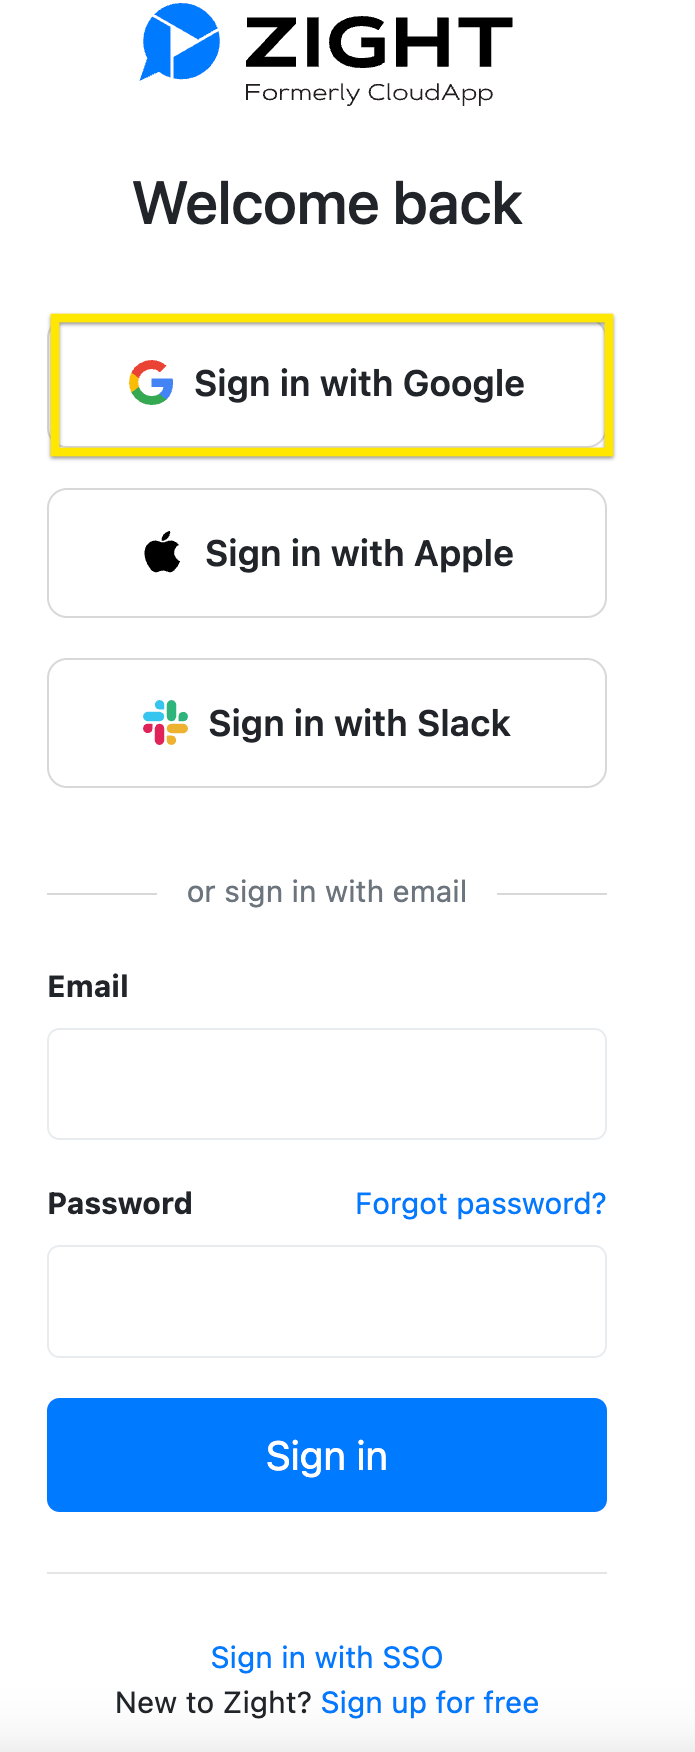 Allow Users to Log In/Sign up Using Other Applications (Google